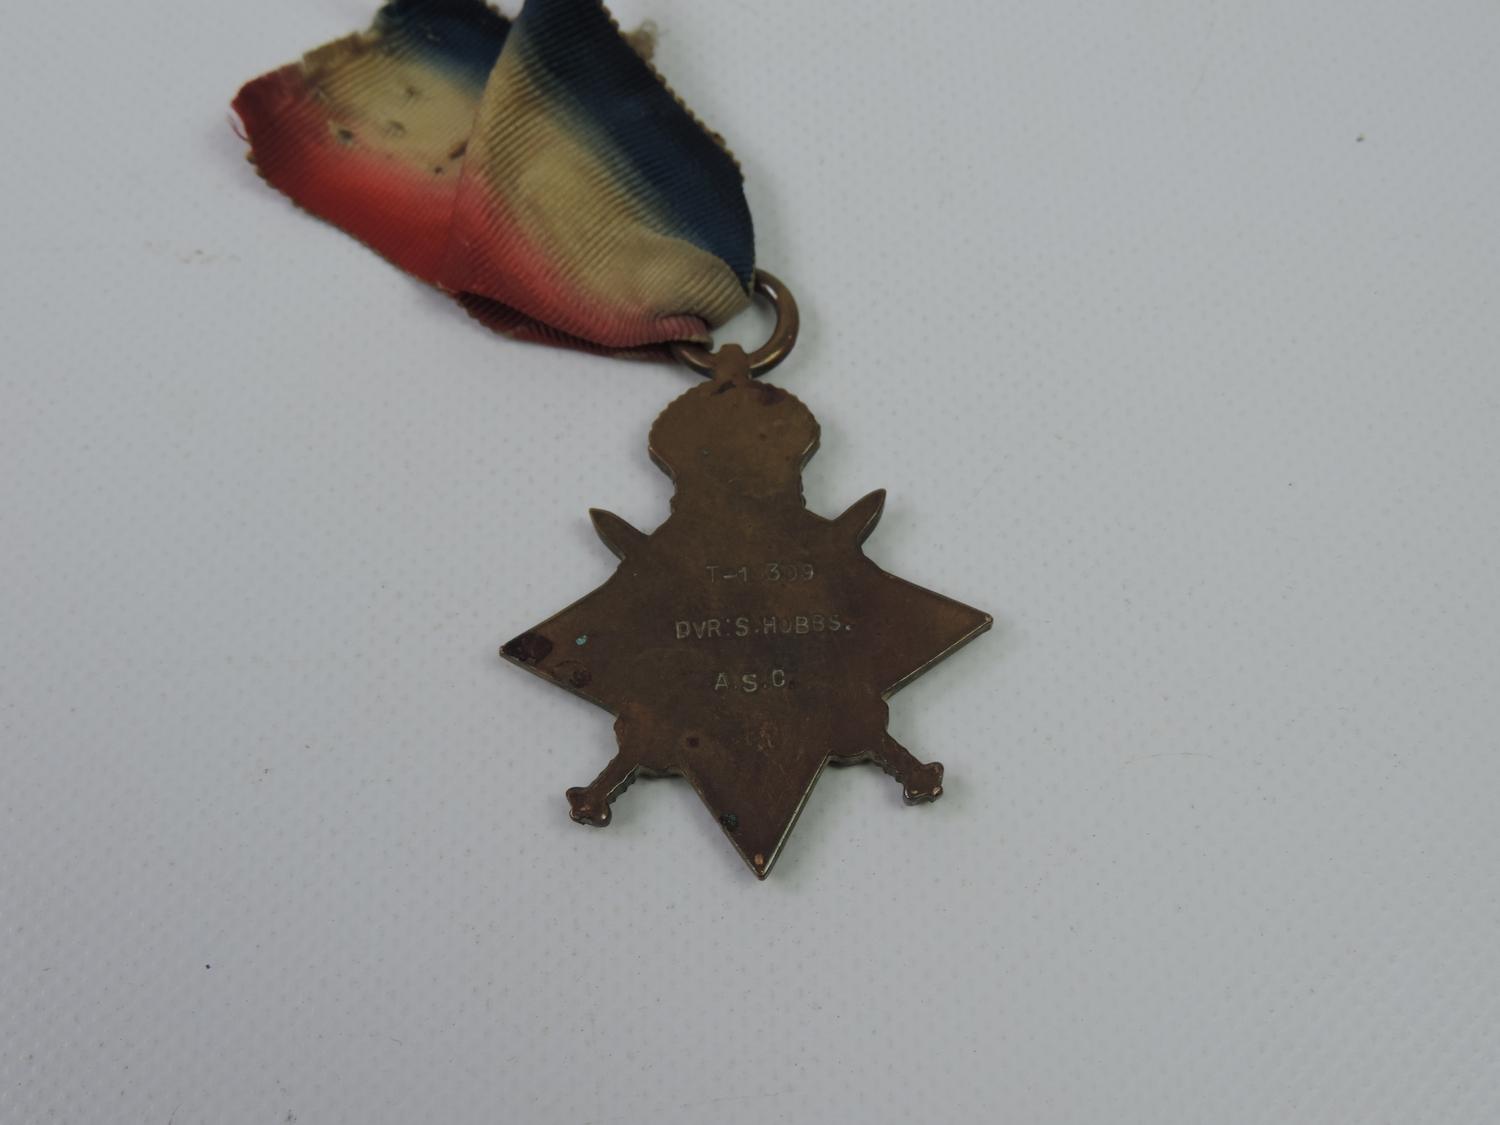 WWI Medals Awarded to Sydney Hobbs (Driver in Army Service Corps) - Image 5 of 6